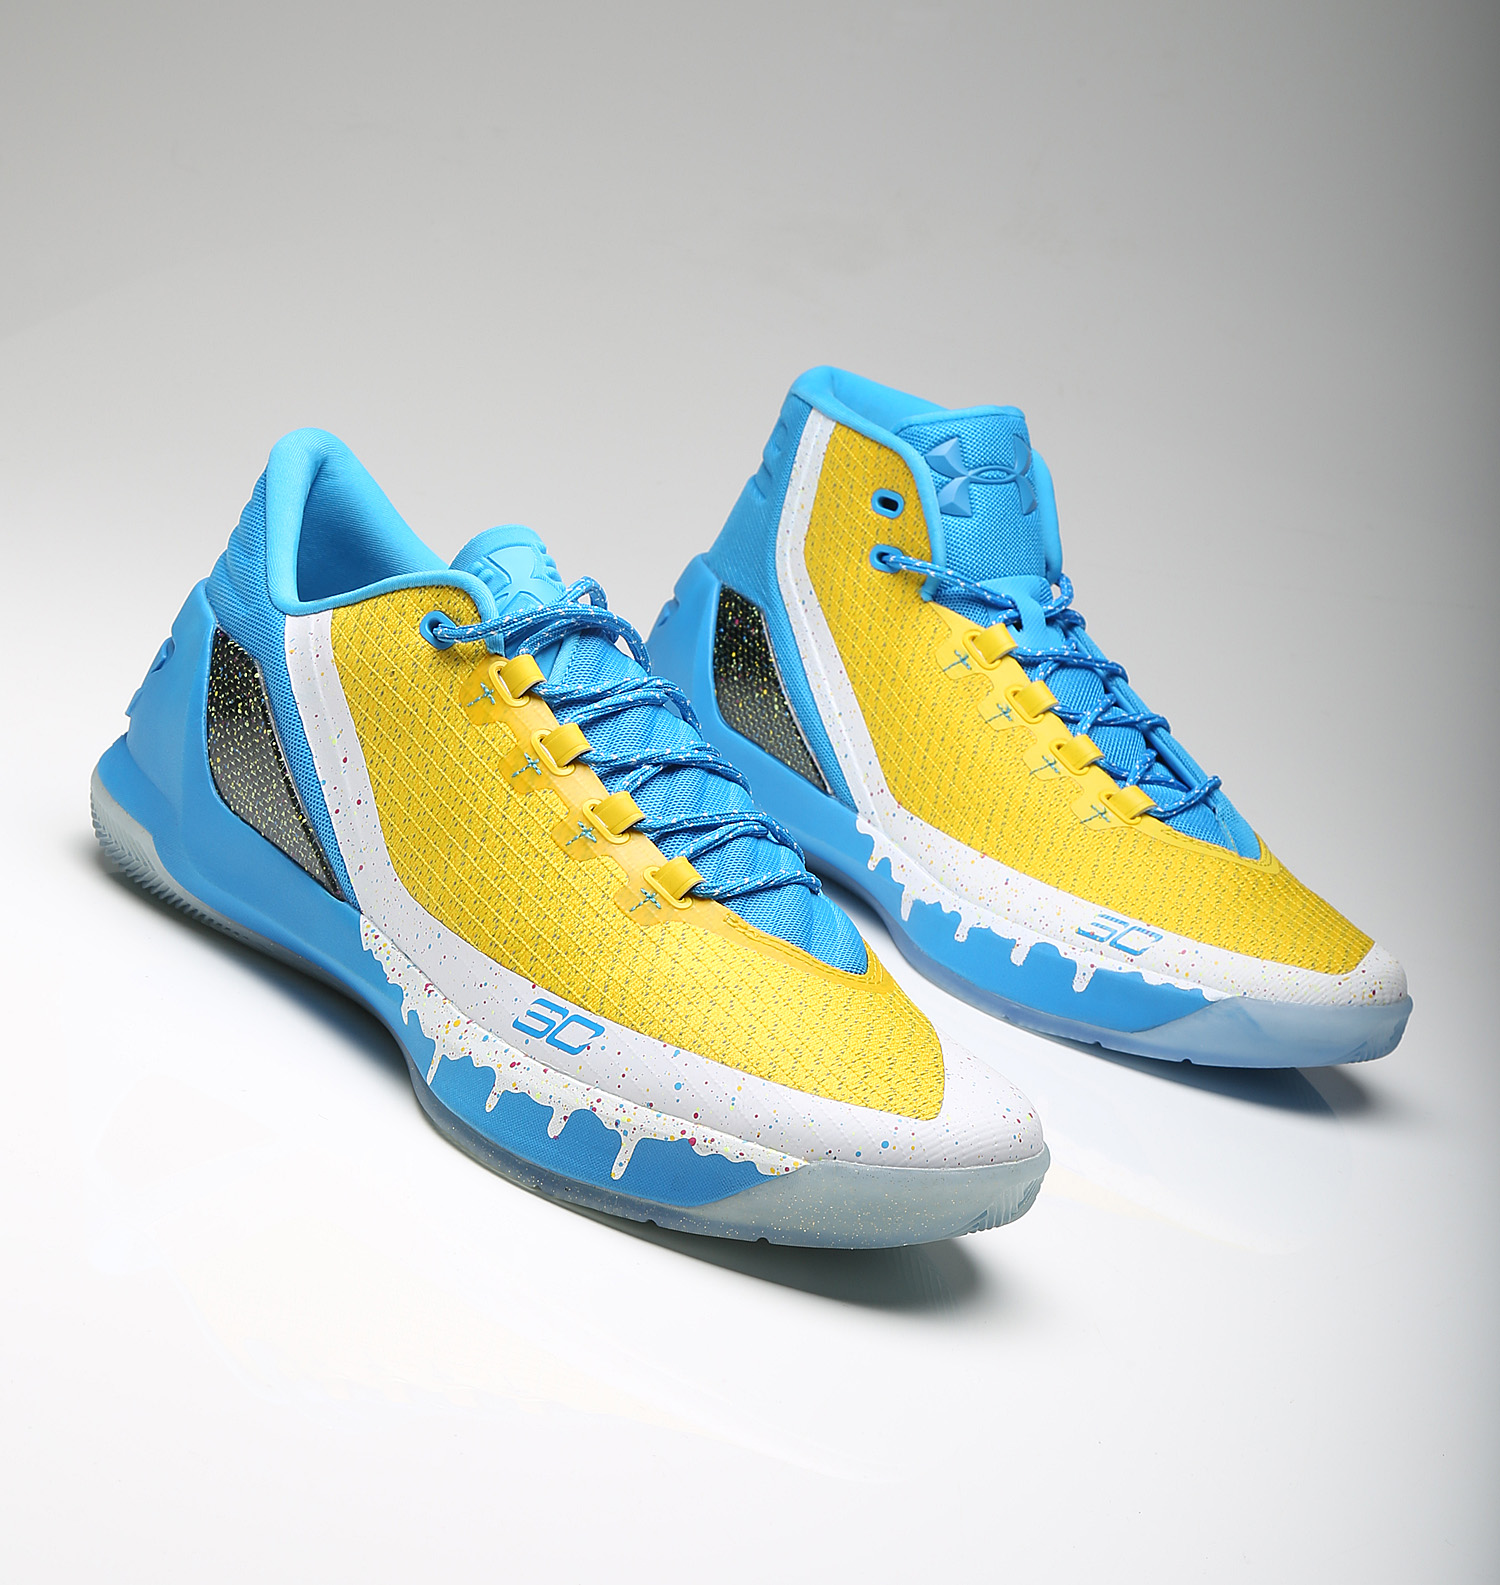 curry 3 white blue yellow